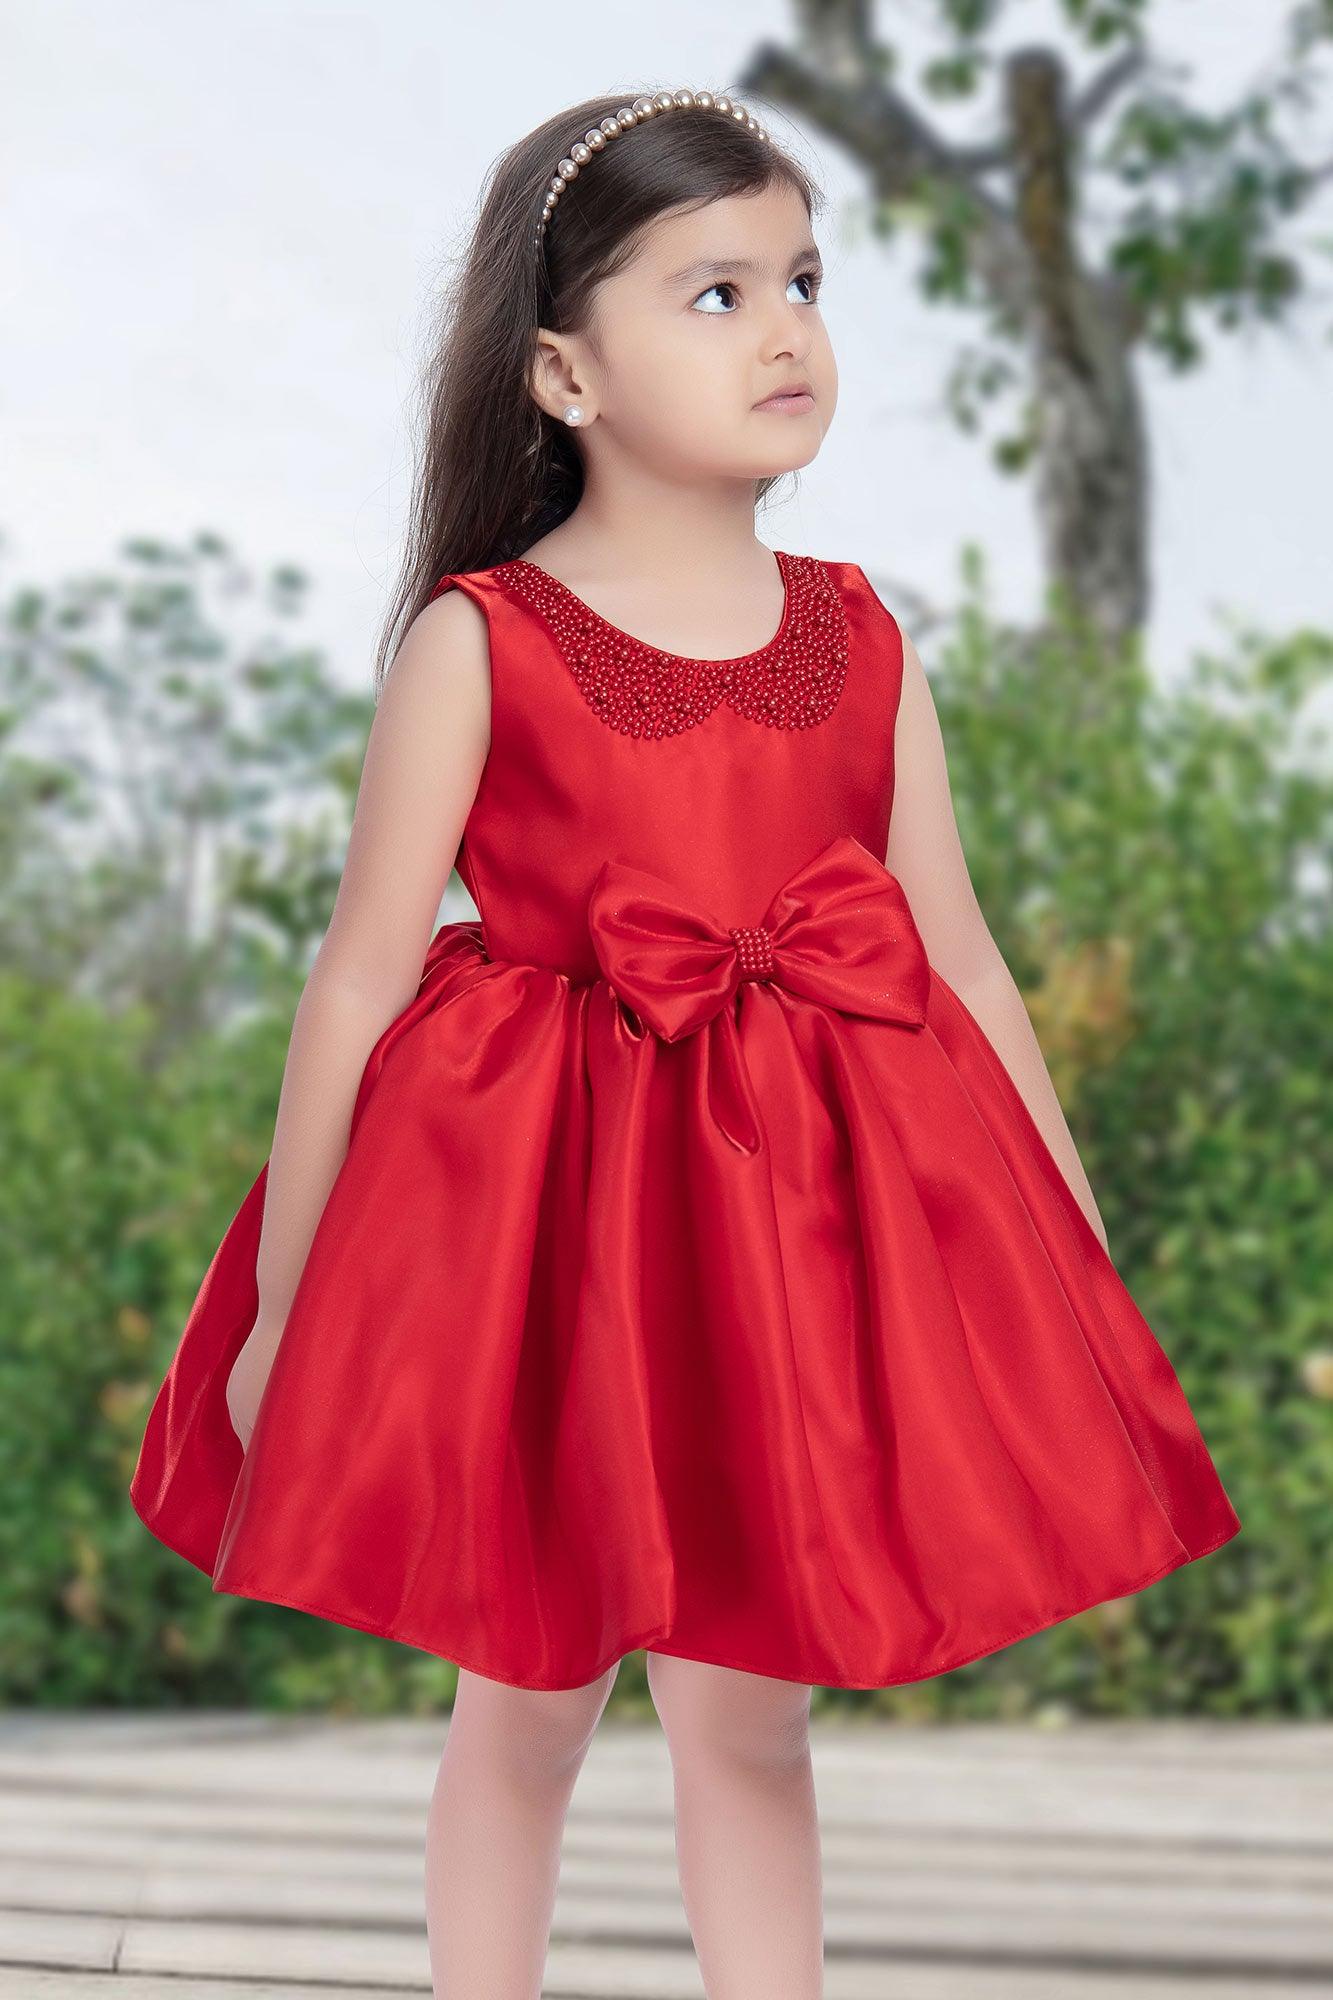 Red Party Wear Frock for Girls - All Eyes on Her! - Lagorii Kids